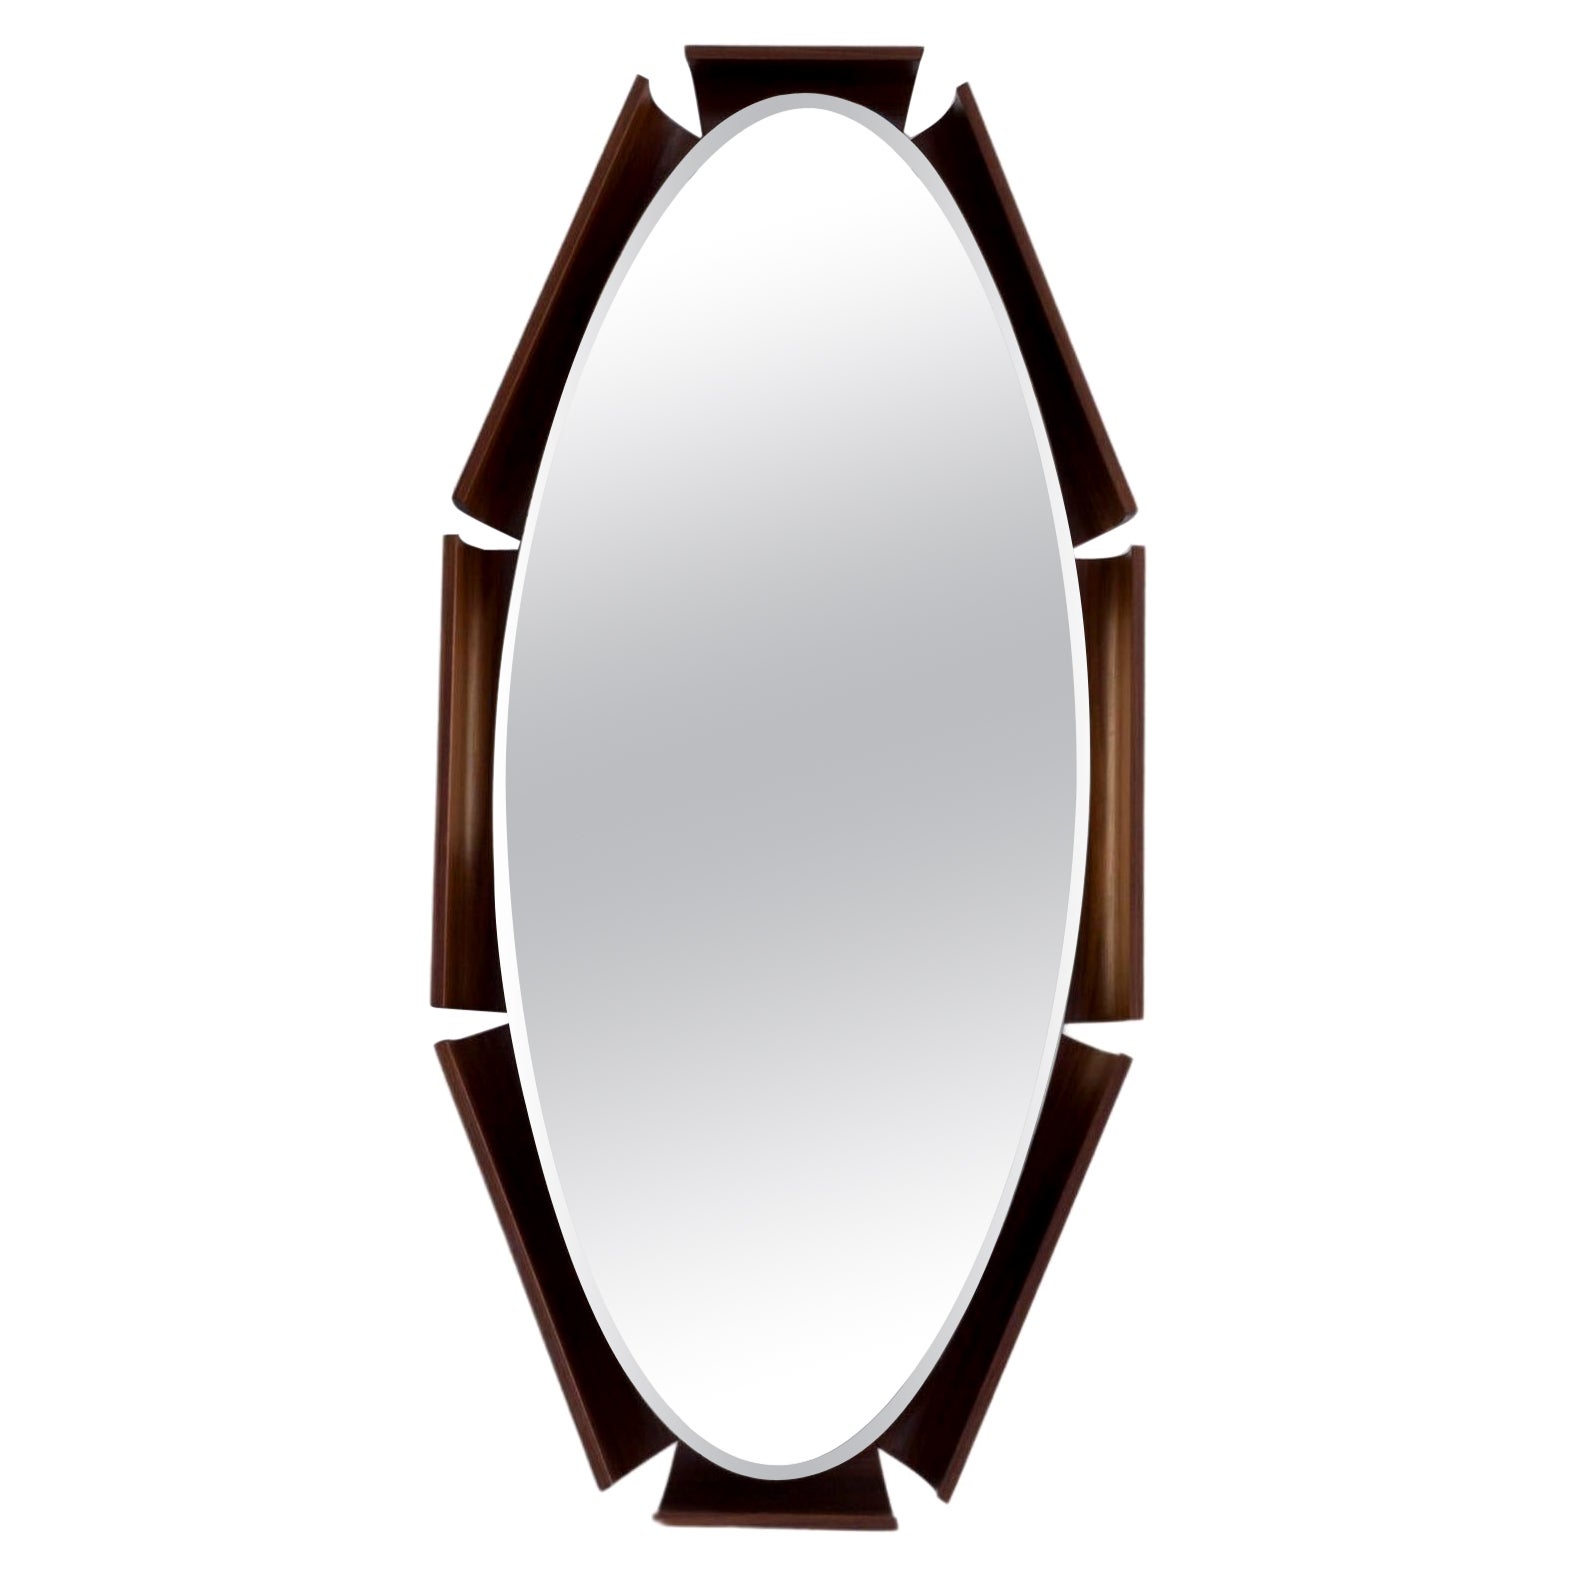 Oval Mirror with Backlight on Curved Teak Plywood Frame, by I.S.A. Bergamo